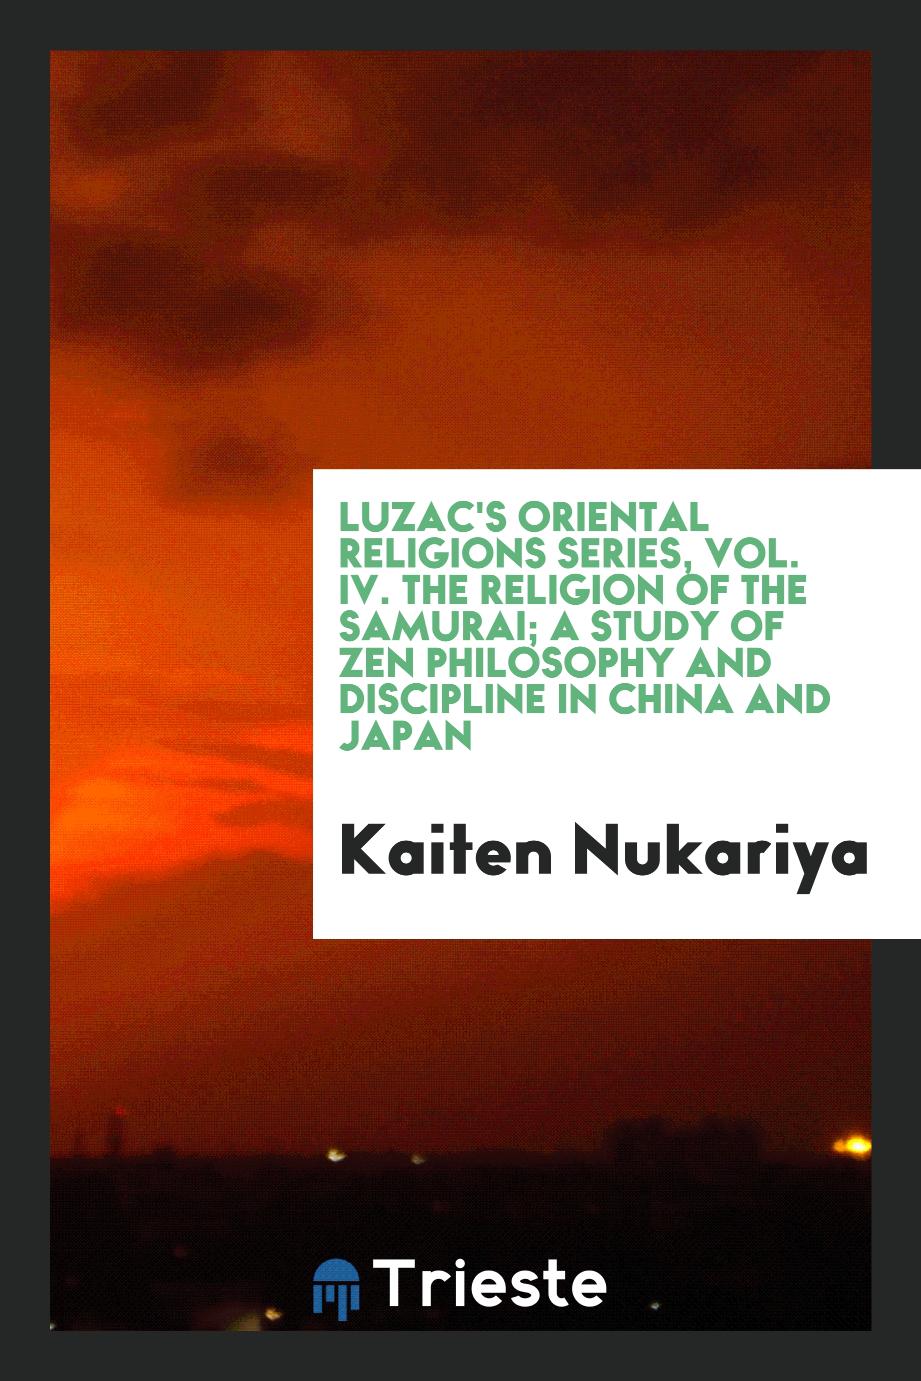 Luzac's oriental religions series, Vol. IV. The religion of the Samurai; a study of Zen philosophy and discipline in China and Japan